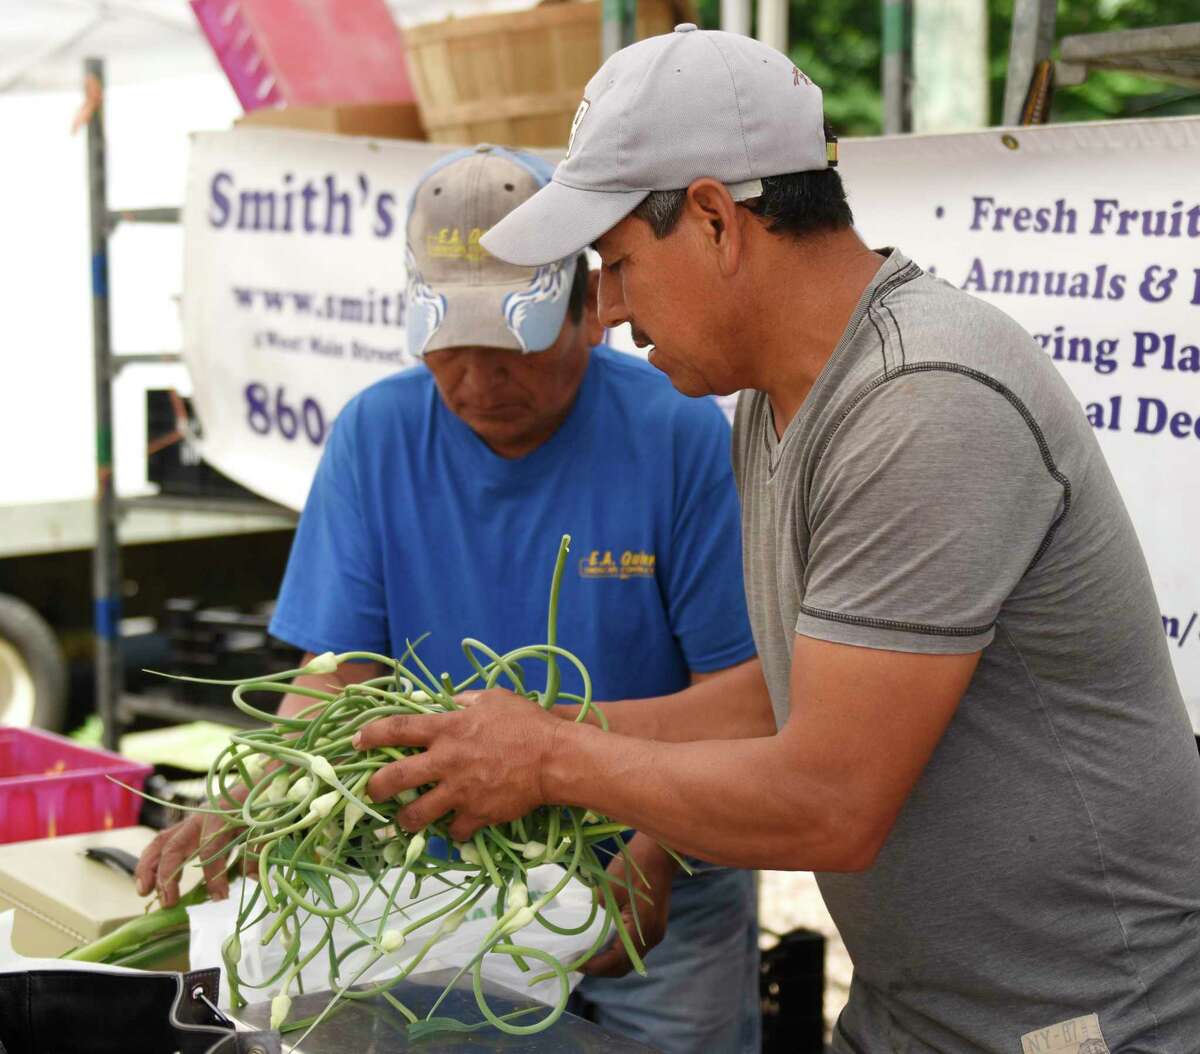 Smith's Acres workers Victorino Vasquez, left, and Guadaloupe Lopez weigh and bag veggies at the Stamford Museum & Nature Center Sunday Farm Market in Stamford, Conn. Sunday, June 30, 2019.